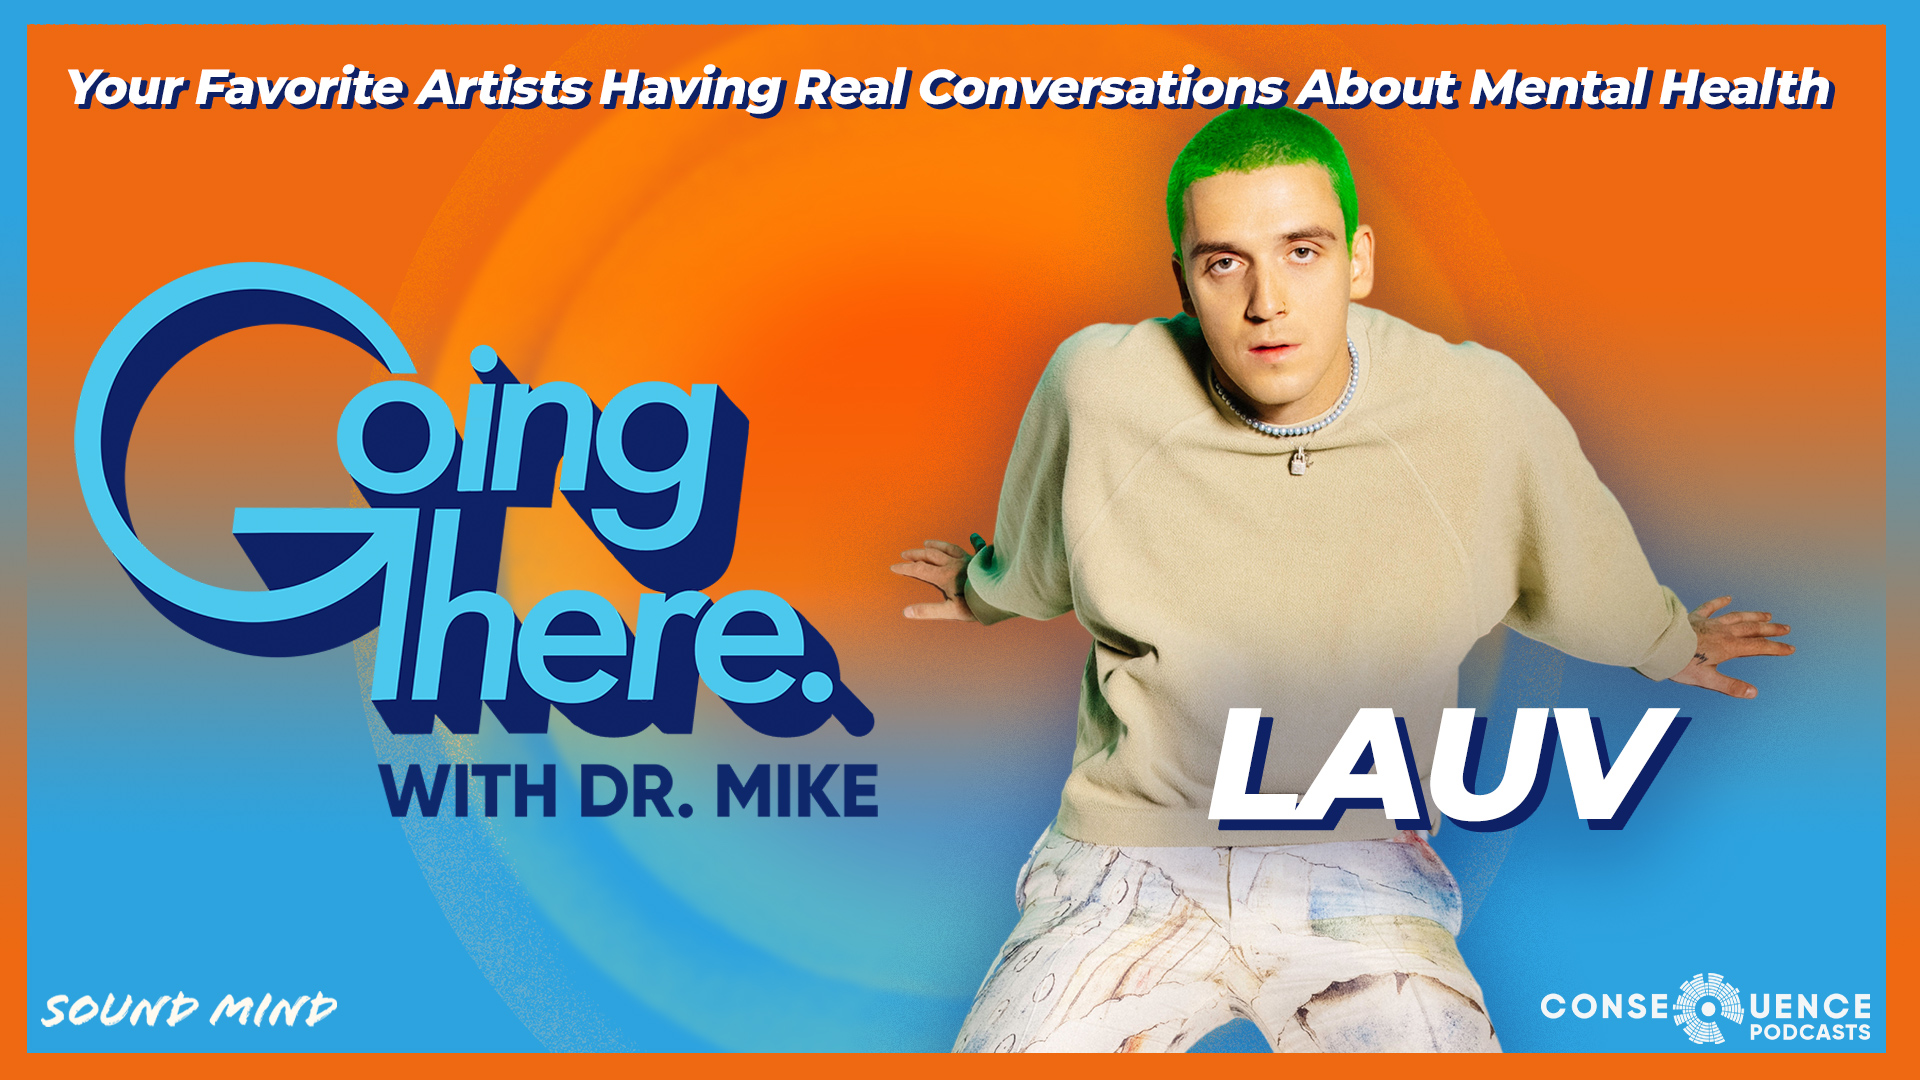 LAUV on Breaking the Grind Cycle with Stillness on the Going There Podcast